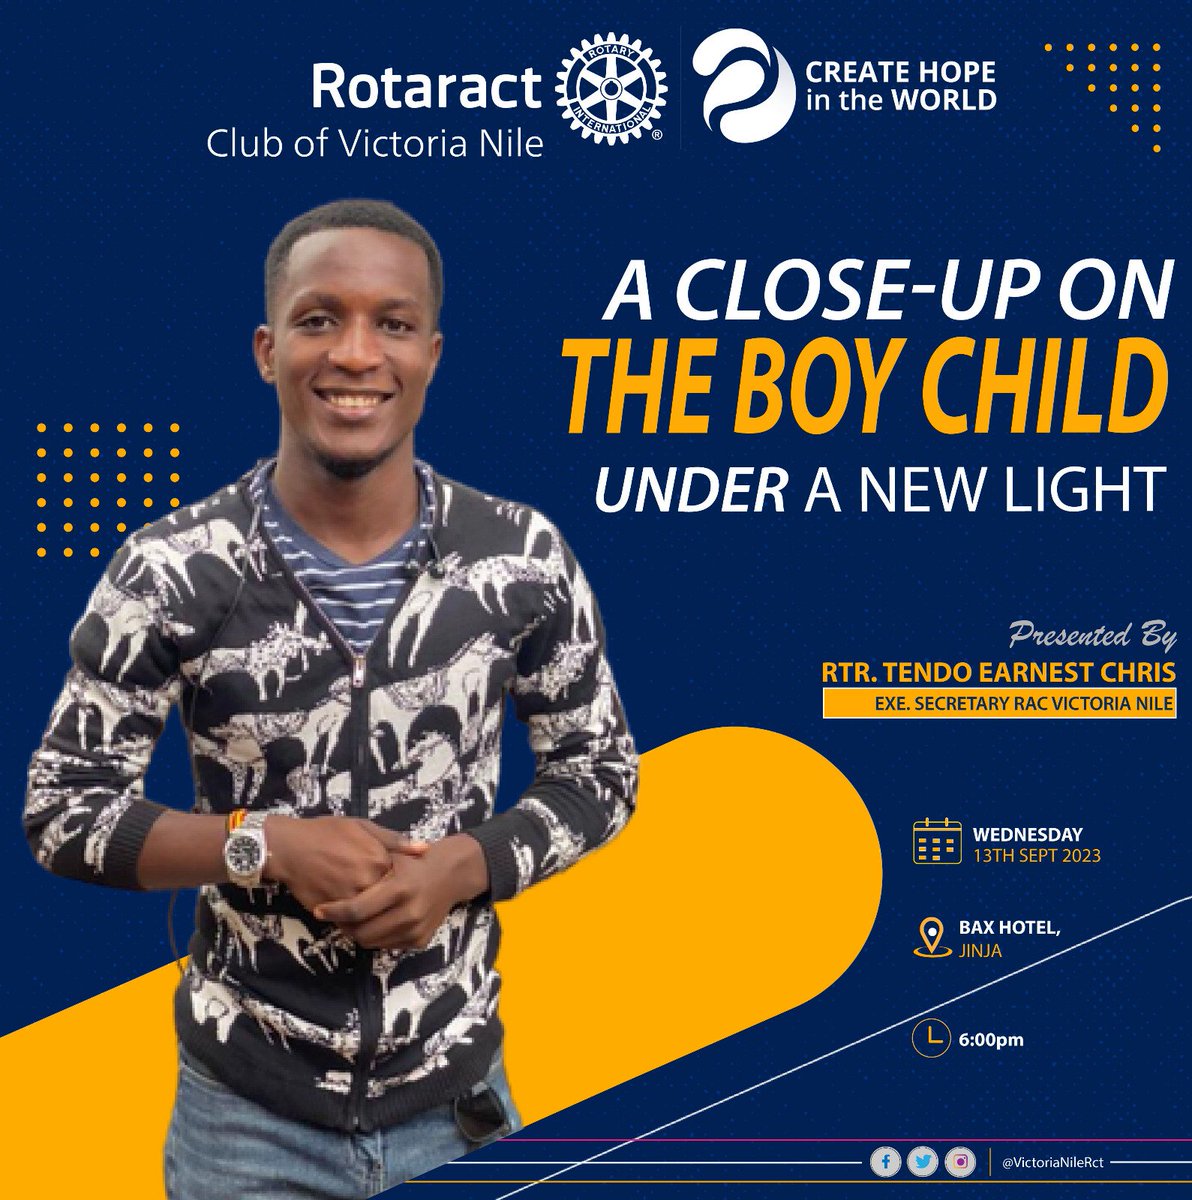 Greetings hope creators 😇 Kindly join us @VictoriaNileRct As we host our very own Rtr @ChrisEarnest2. Topic A close-up on the boy child under a new light. Join Zoom Meeting us06web.zoom.us/j/86718487545?… Meeting ID: 867 1848 7545 Passcode: Nile